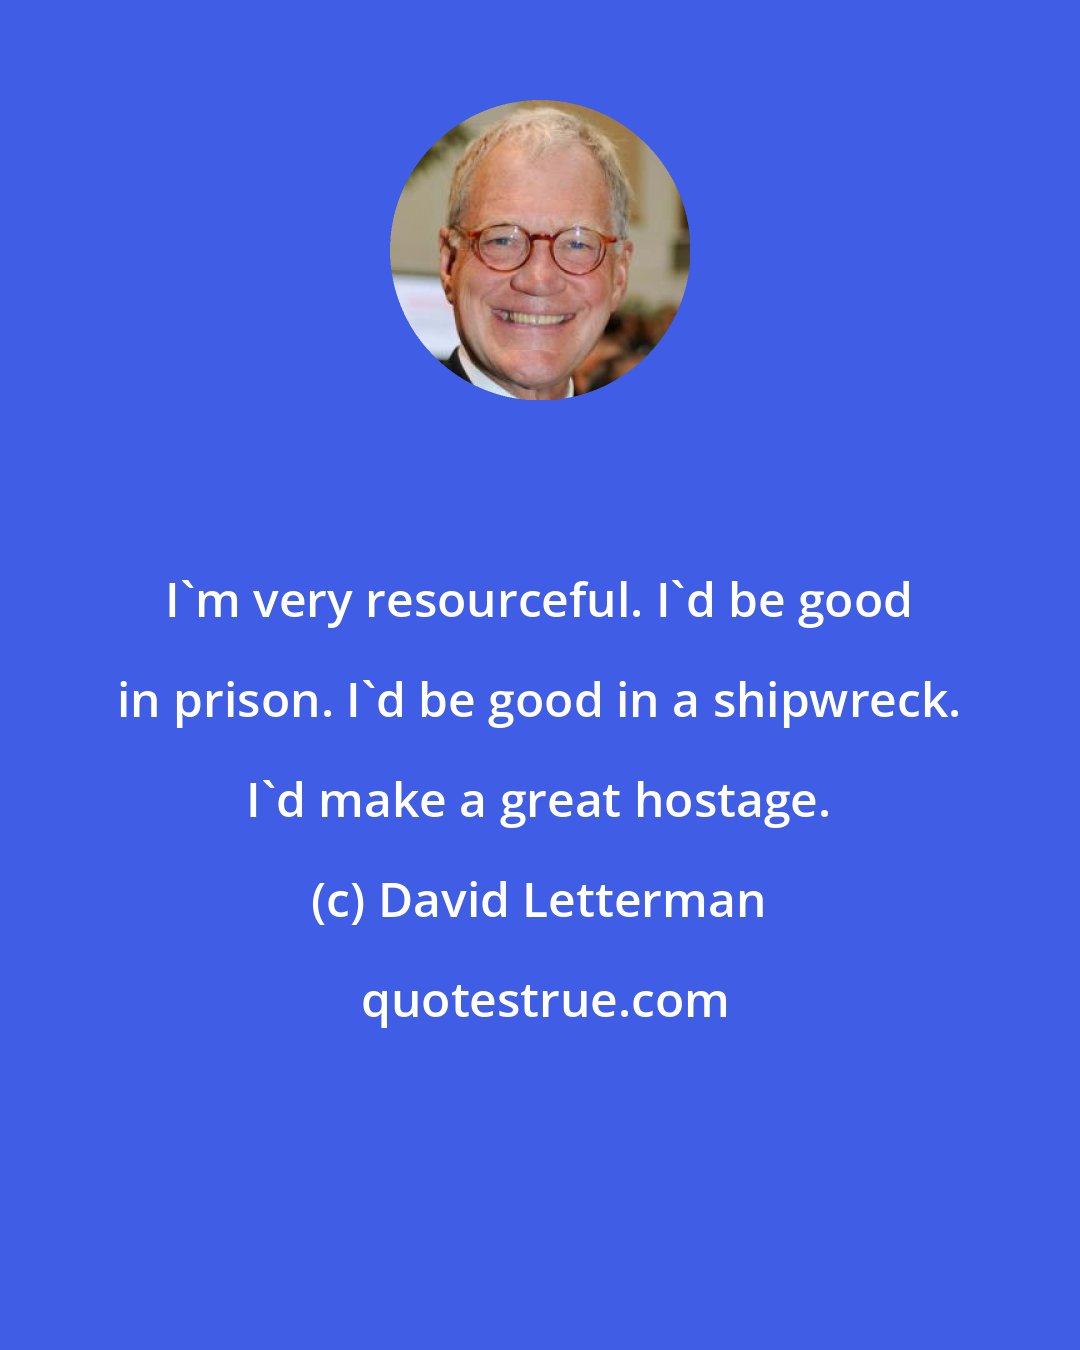 David Letterman: I'm very resourceful. I'd be good in prison. I'd be good in a shipwreck. I'd make a great hostage.